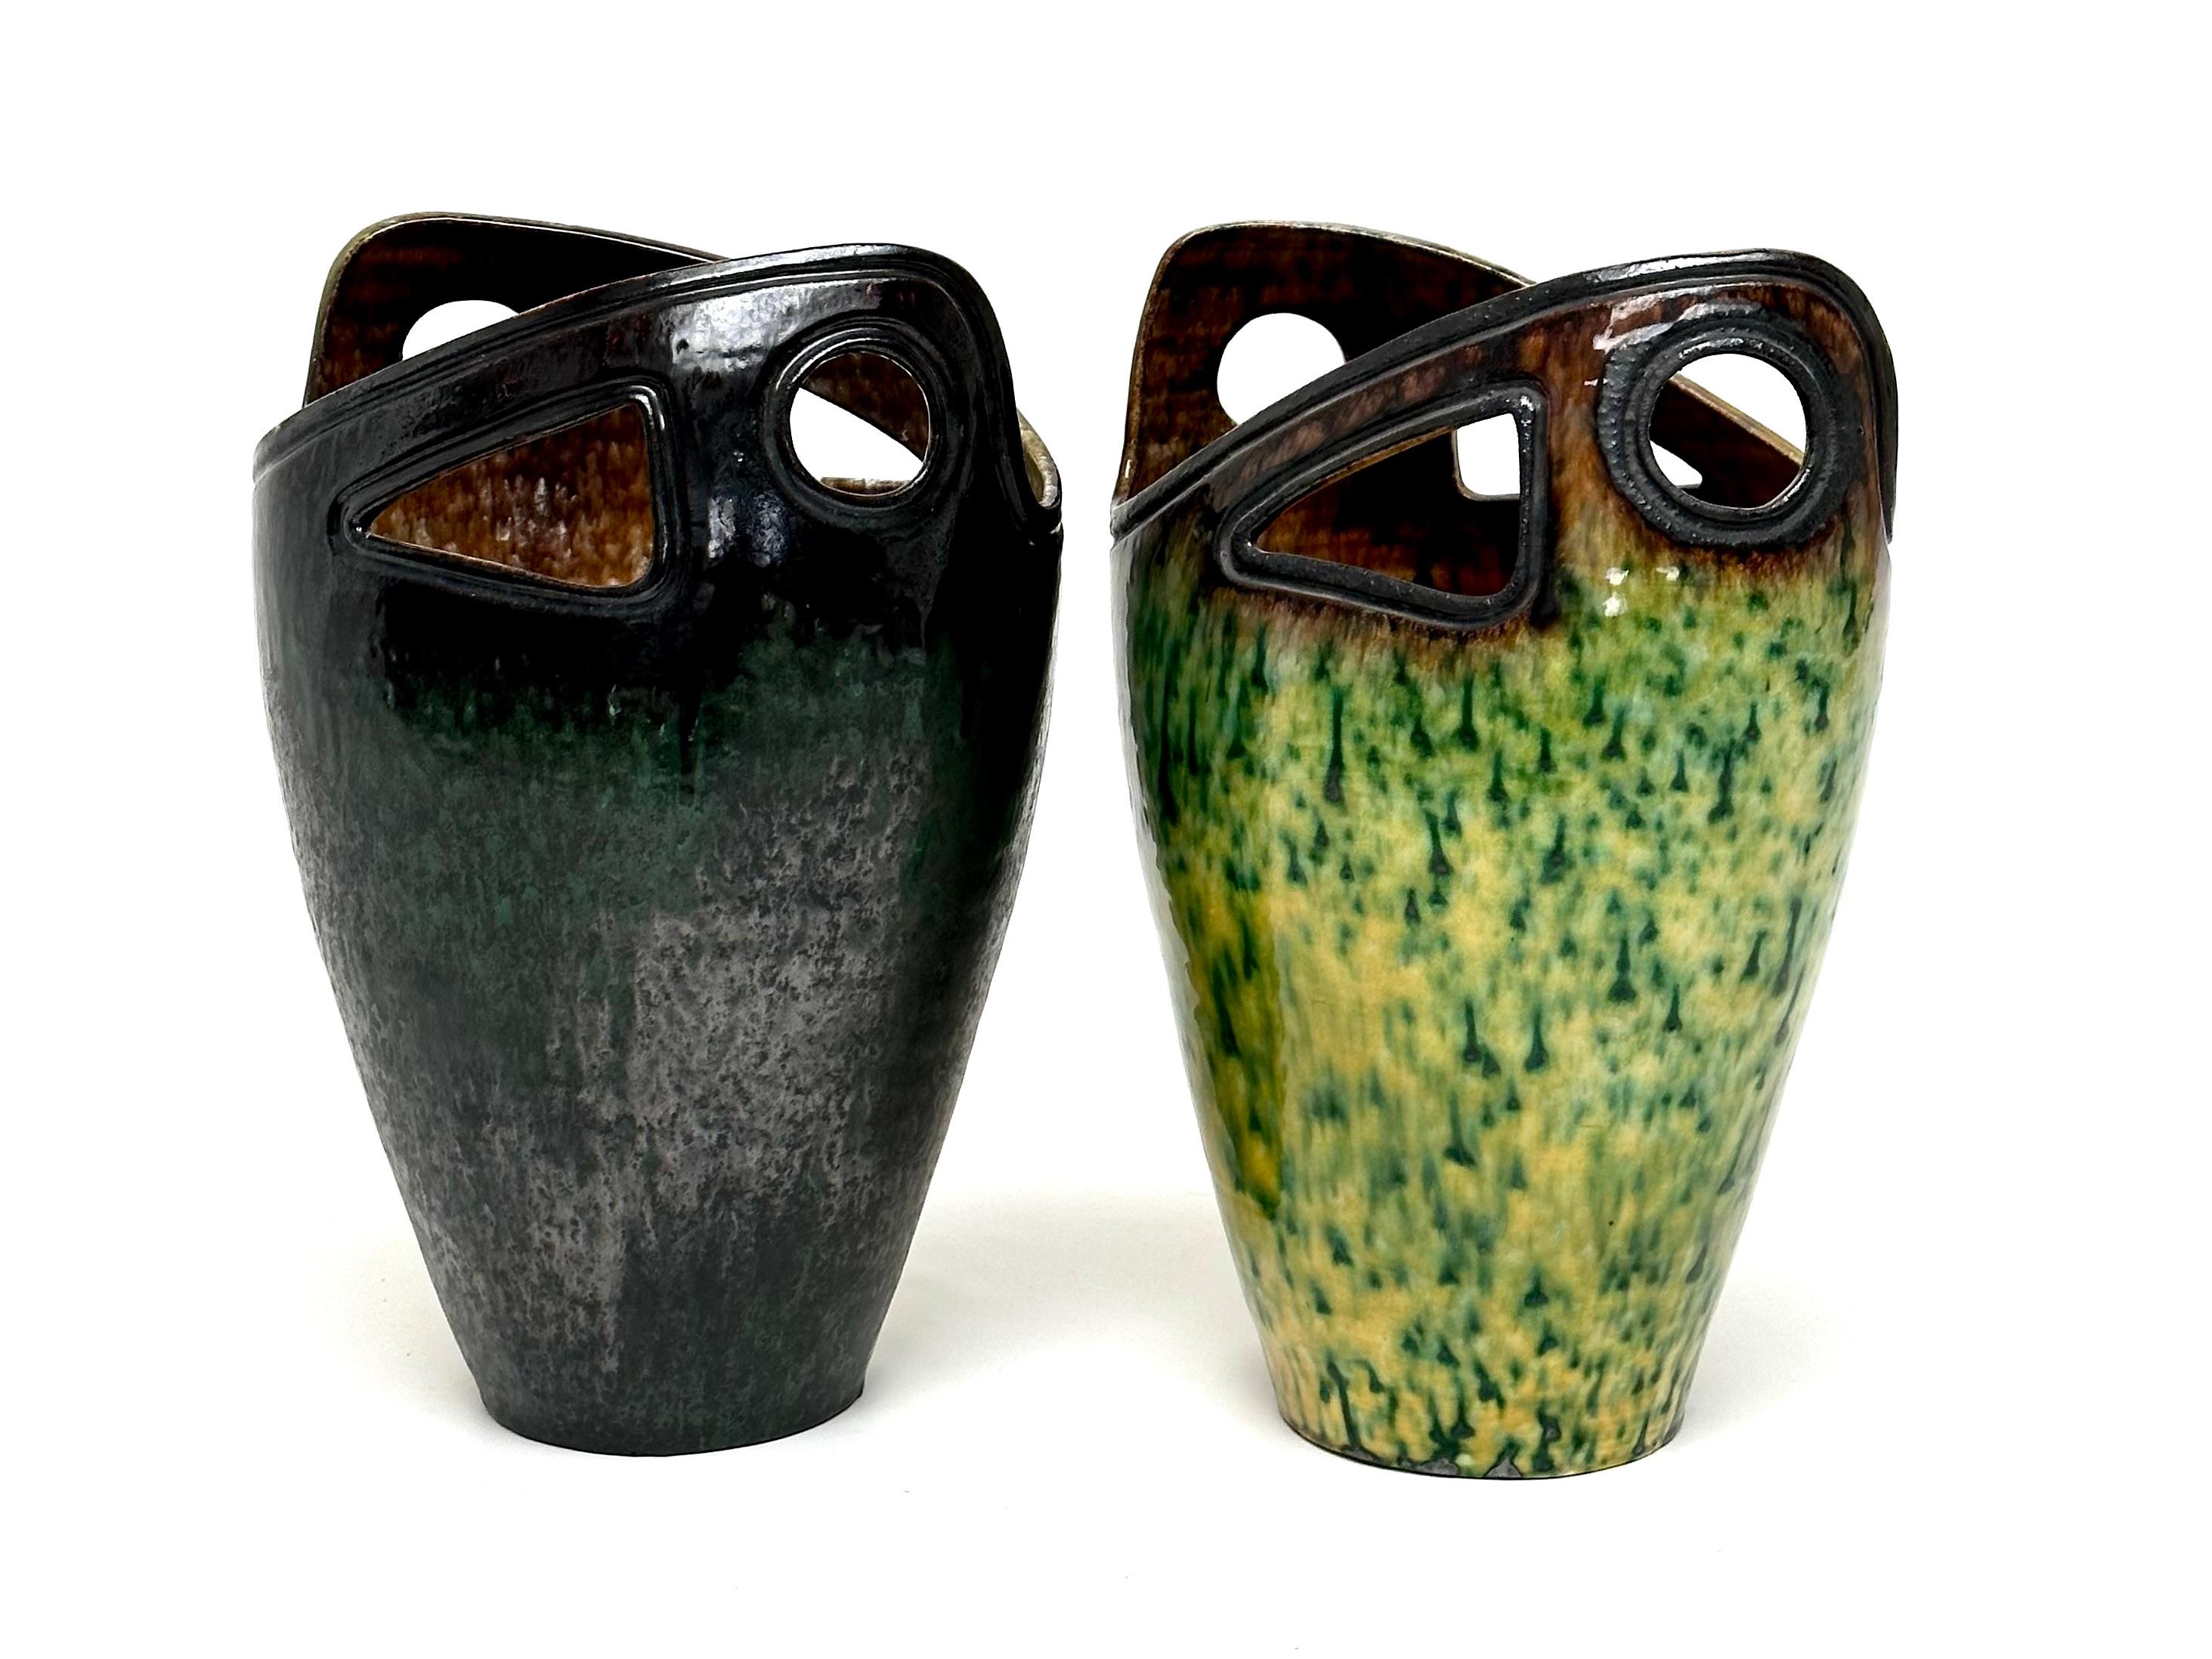 Two large free-form vases crafted in their upper parts.
A nice balance between a classic base and an exaggeration of the forms typical of the 50s.

Each piece bears the full signature of Accolay, the model references and the potter's initials at the